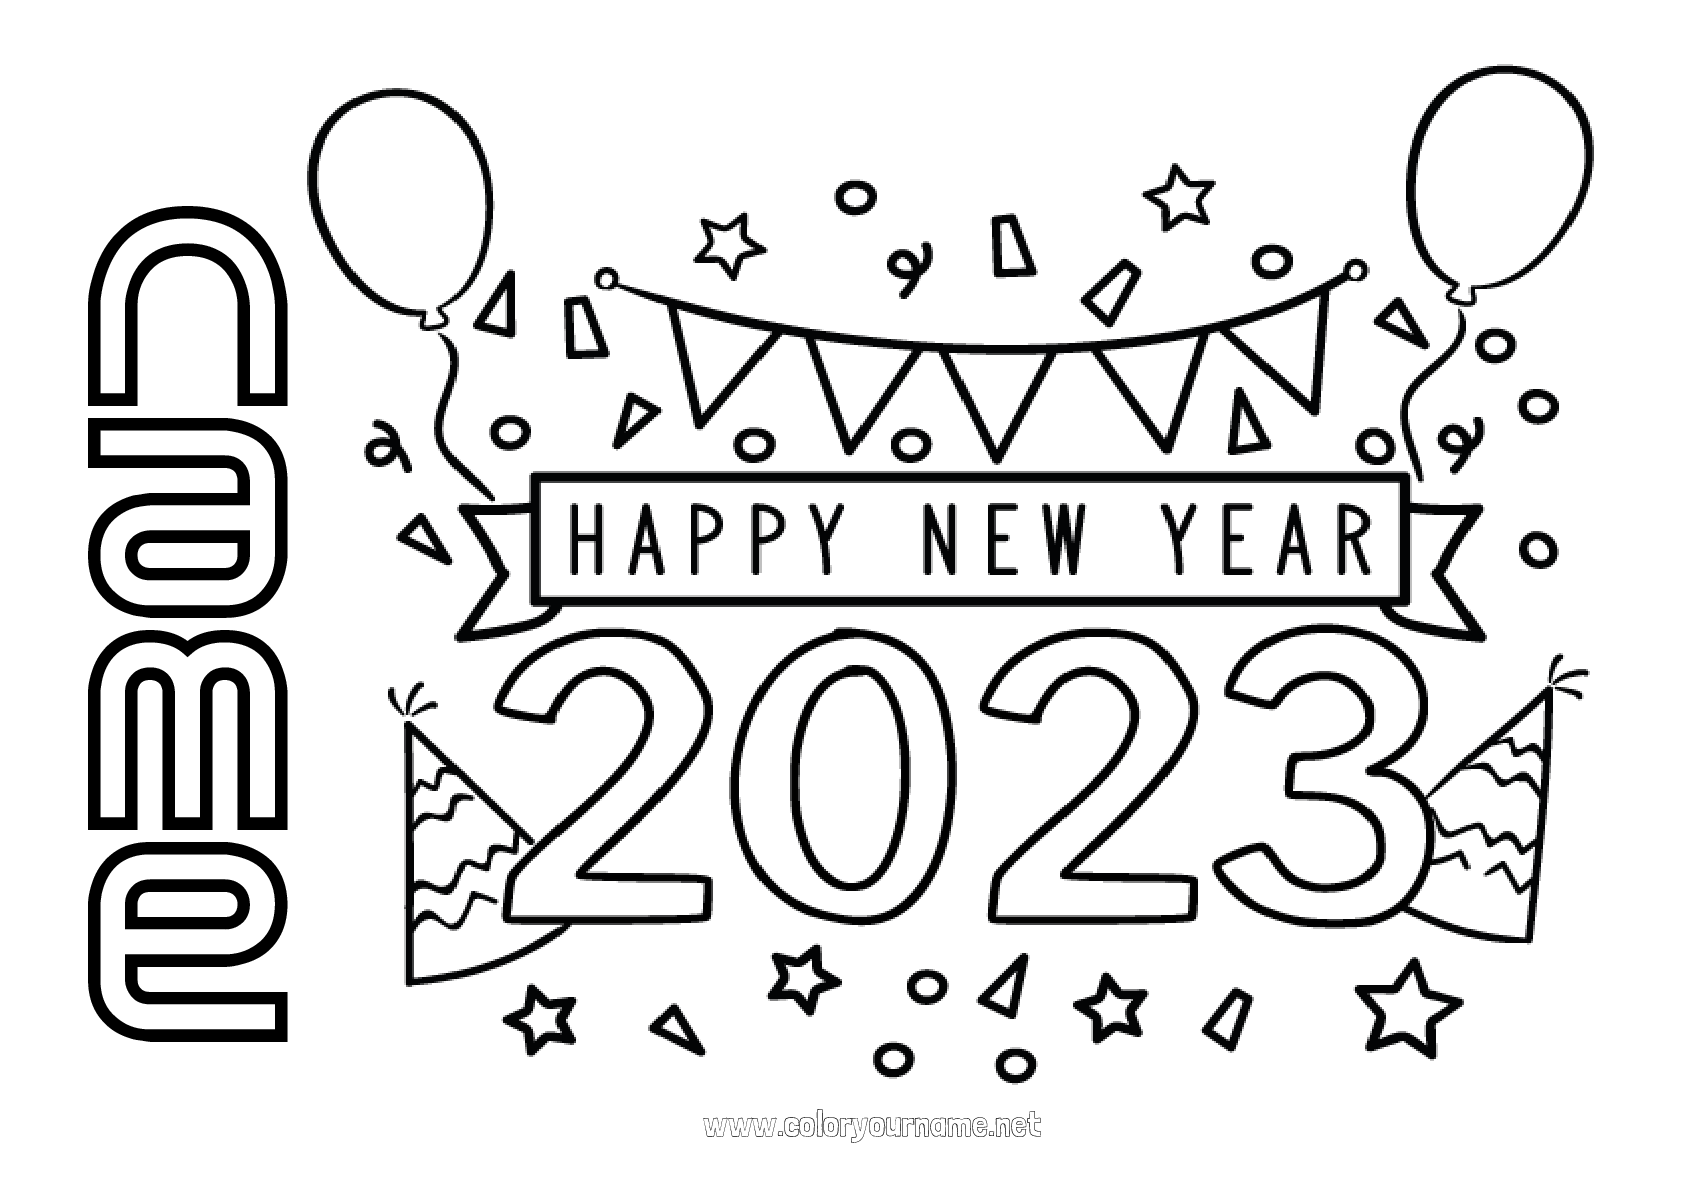 Coloring page No.455 Happy new year Christmas wreath